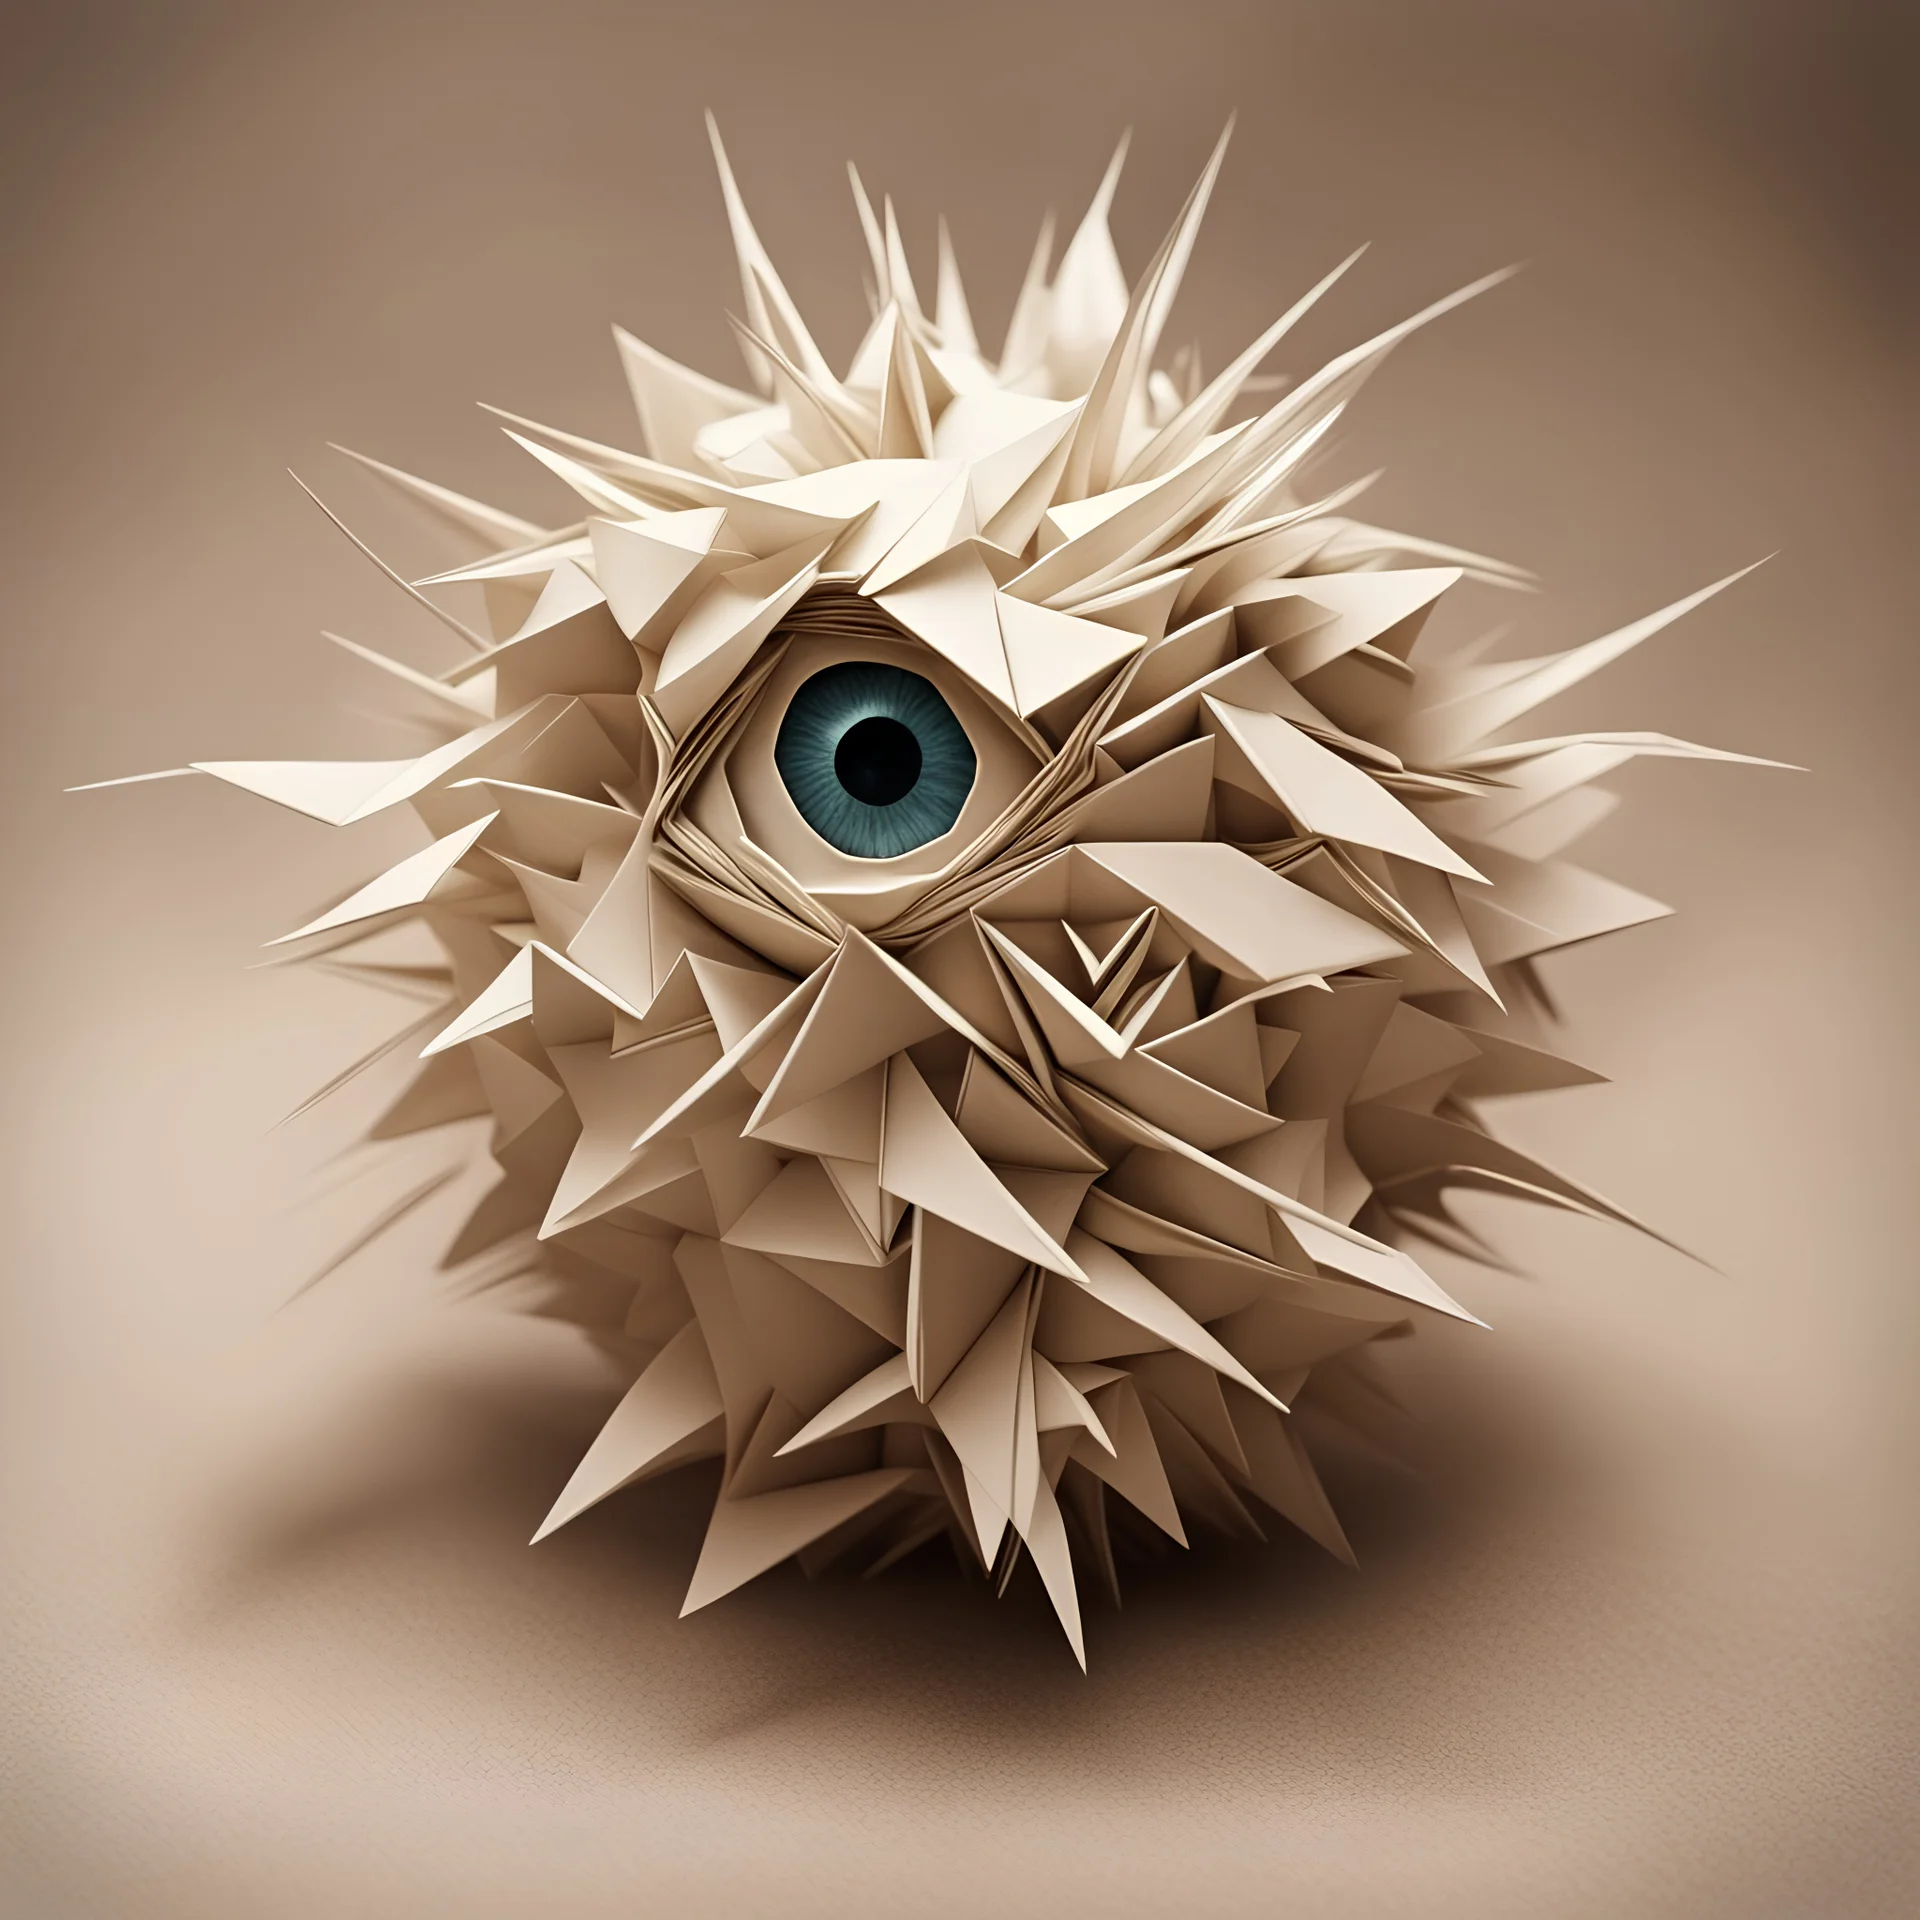 the tumble weed has eyes and is creepy in origami art style